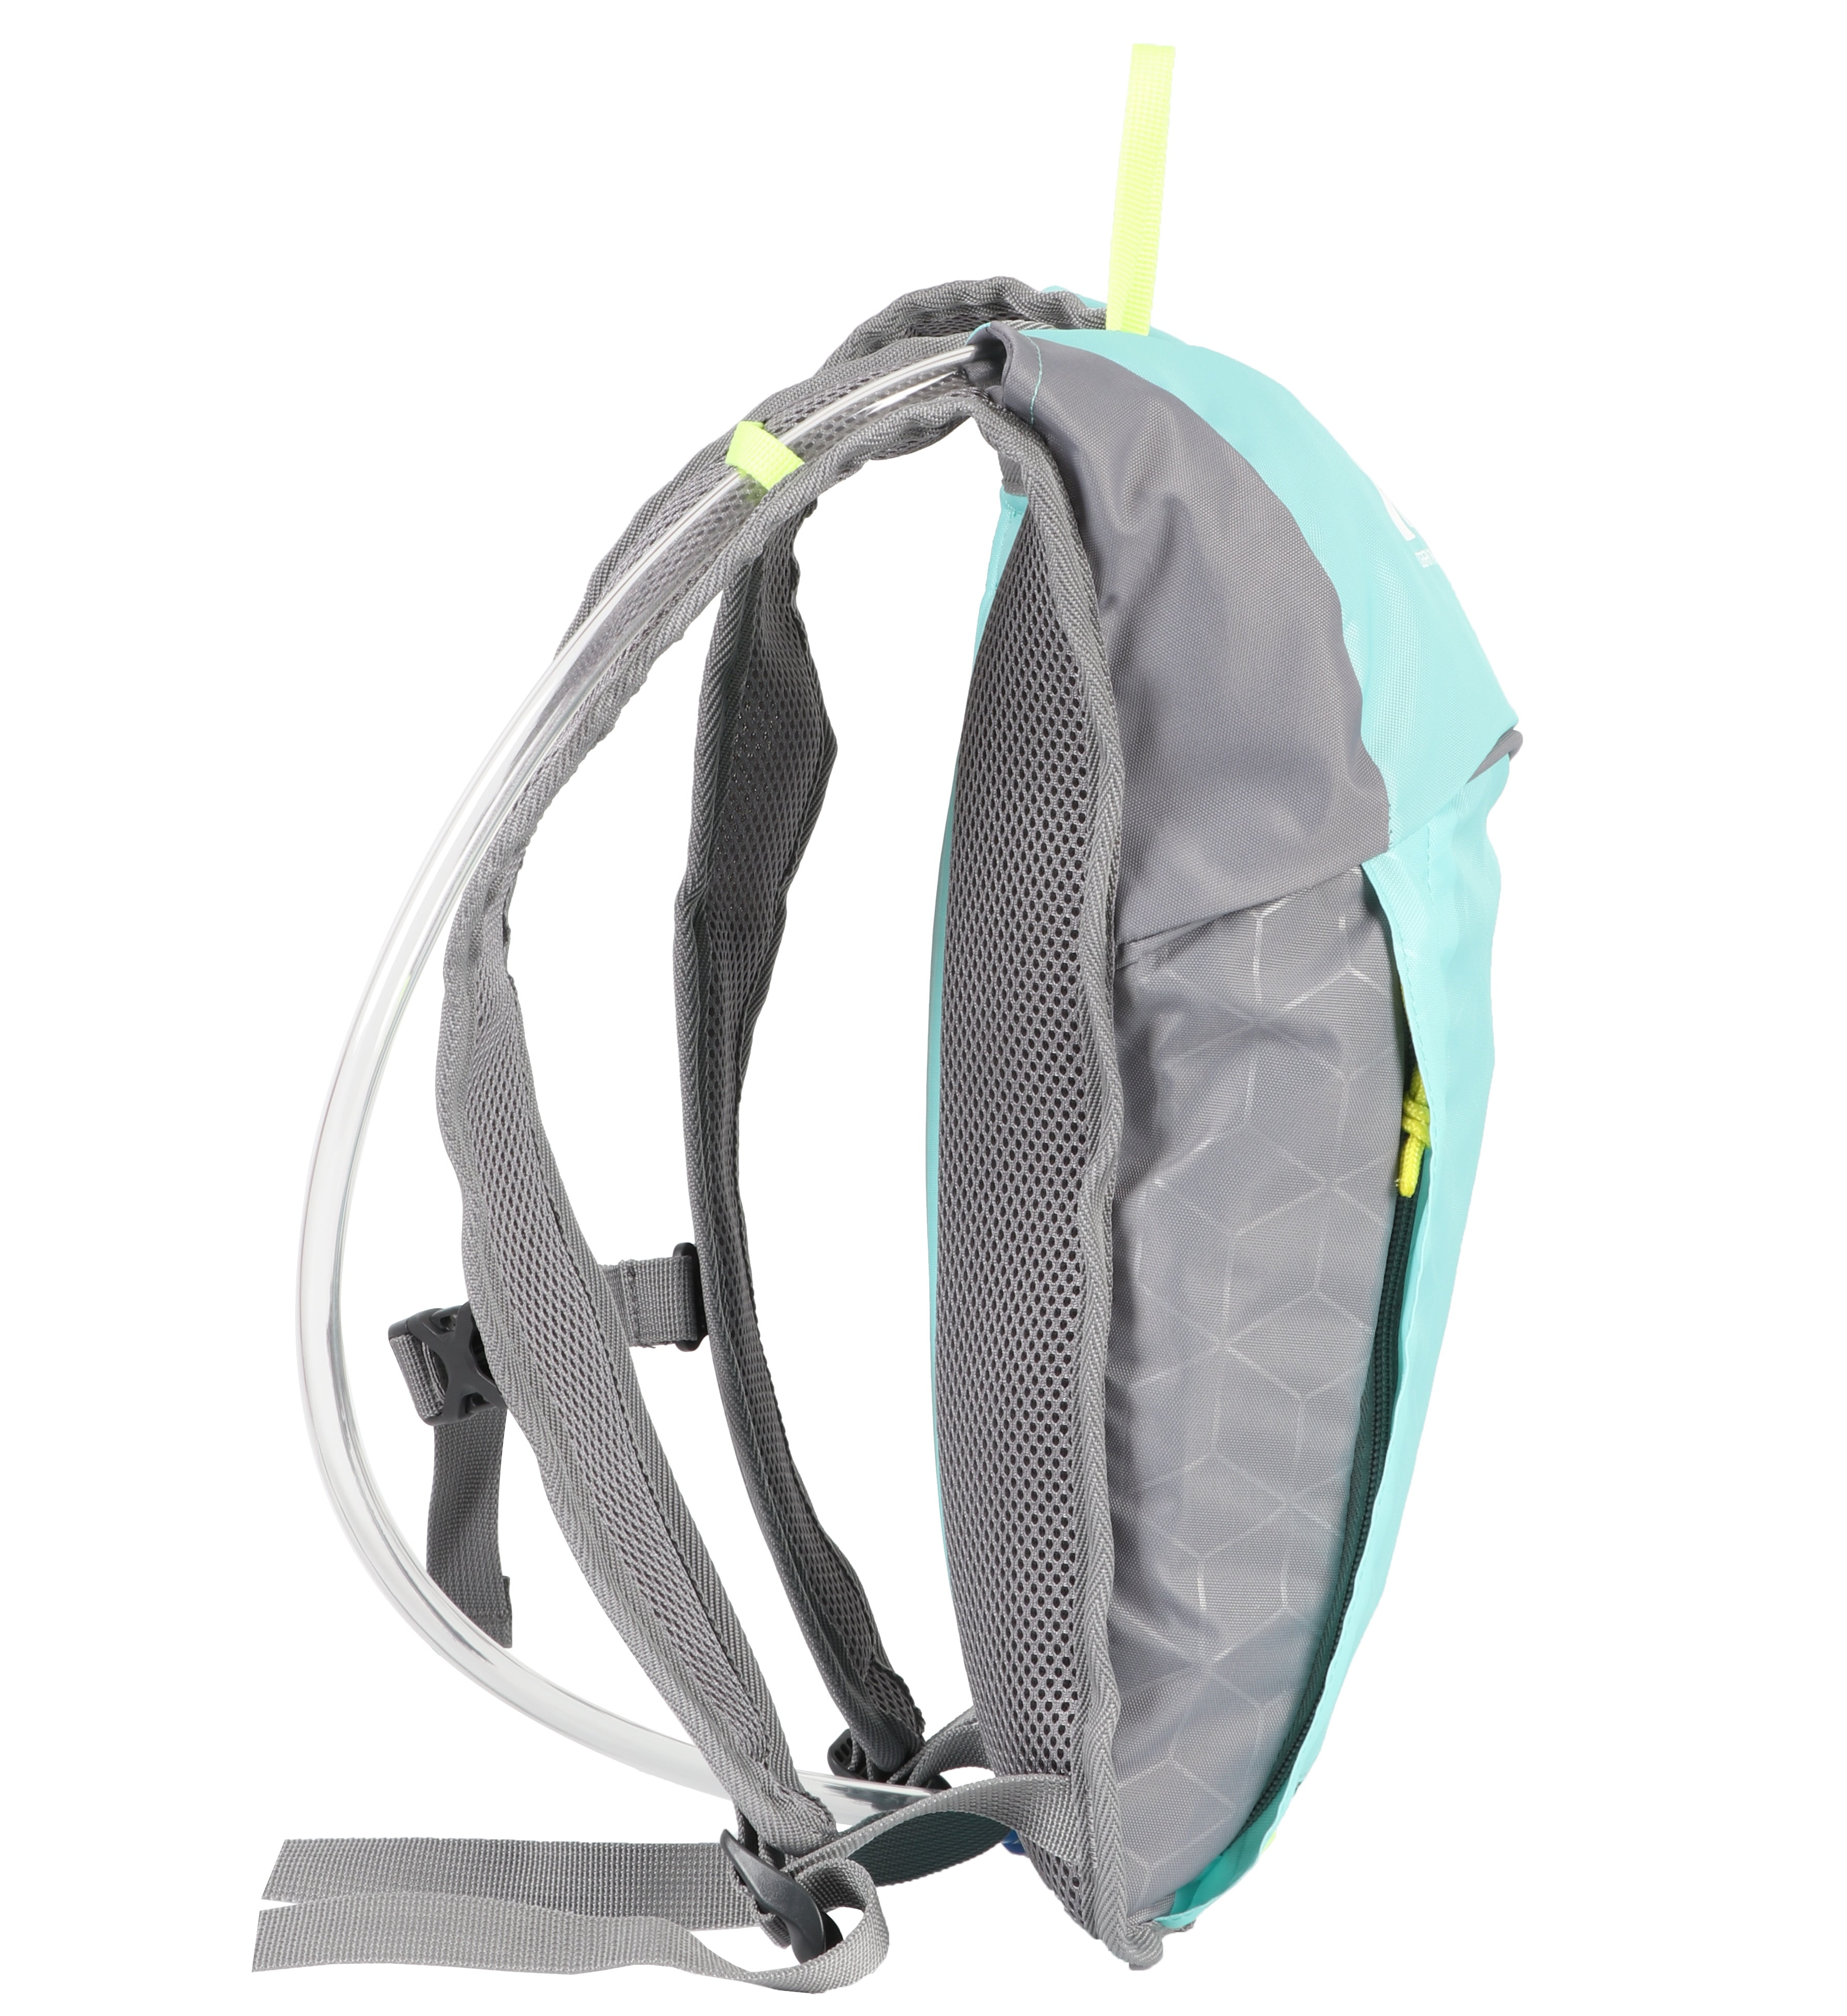 2 Liter Hydration Backpack with Bladder by WFS - Desert Springs